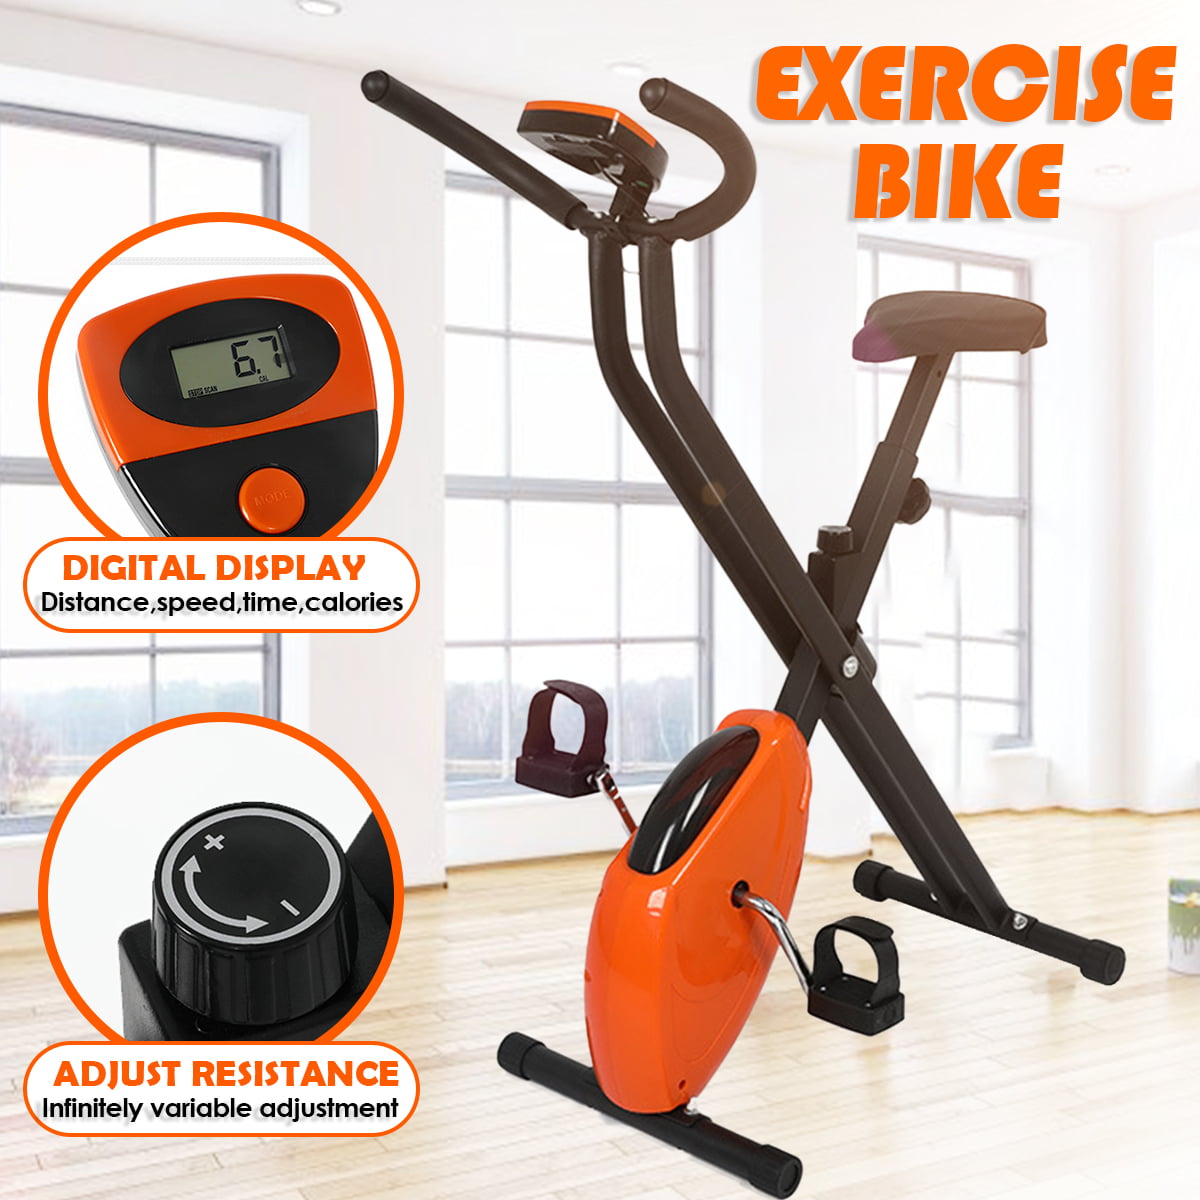 Details about   Bicycle Cycling Exercise Bike Folding Fitness Cardio Indoor Home Workout Gym US 